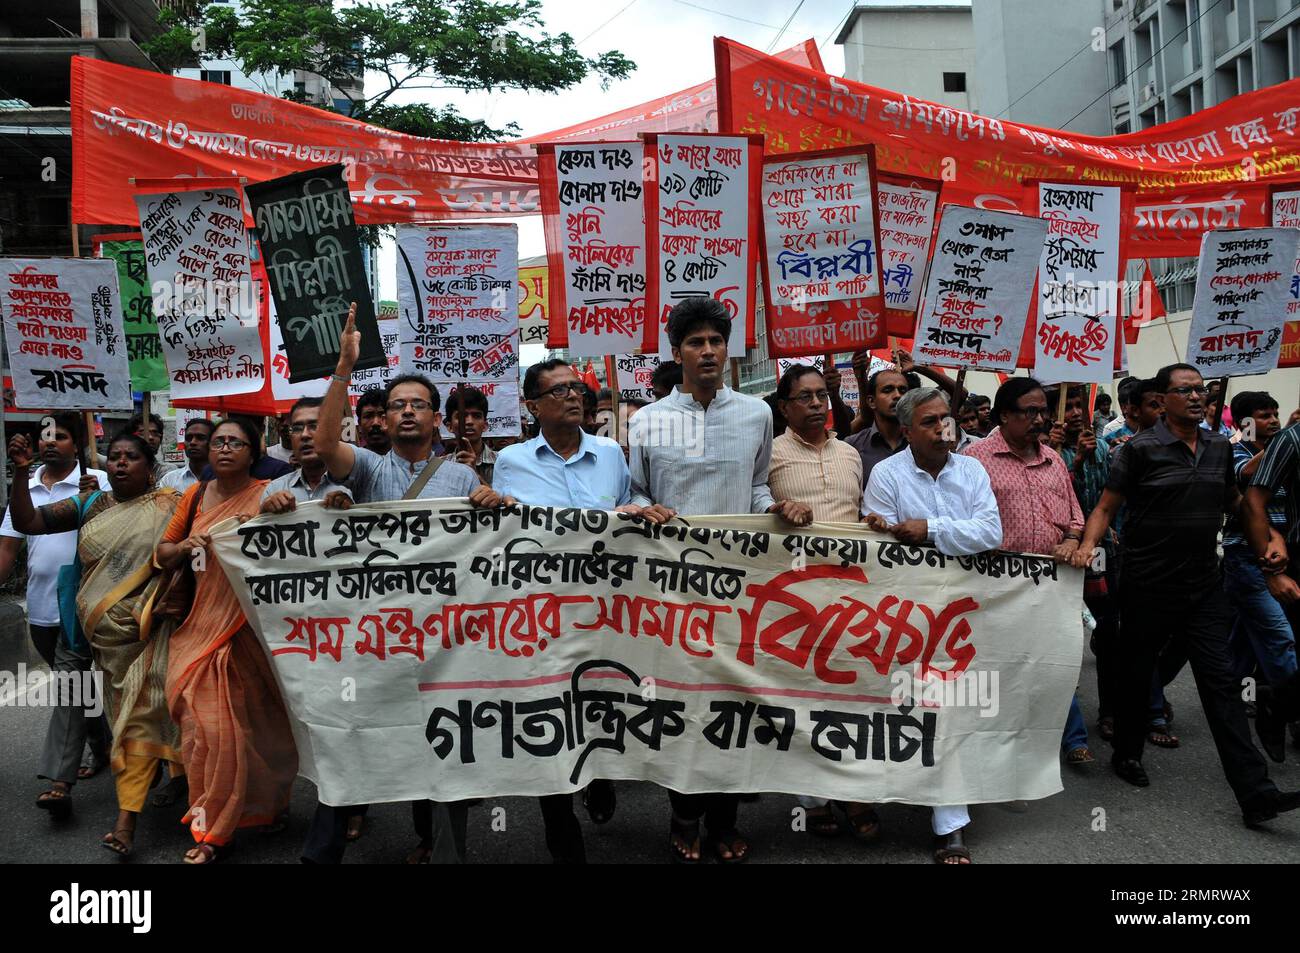 (140804) -- DHAKA, Aug. 4, 2014 -- Garment workers of Tuba Group and left-wing political party members attend a protest rally against unpaid salaries in front of Press Club in Dhaka, Bangladesh, Aug. 4, 2014. Several hundreds of workers demonstrated Monday demanding three months unpaid salaries and Eid Bonus. ) BANGLADESH-DHAKA-PROTEST SharifulxIslam PUBLICATIONxNOTxINxCHN   Dhaka Aug 4 2014 Garment Workers of Tuba Group and left Wing Political Party Members attend a Protest Rally against unpaid salaries in Front of Press Club in Dhaka Bangladesh Aug 4 2014 several hundreds of Workers demonstr Stock Photo